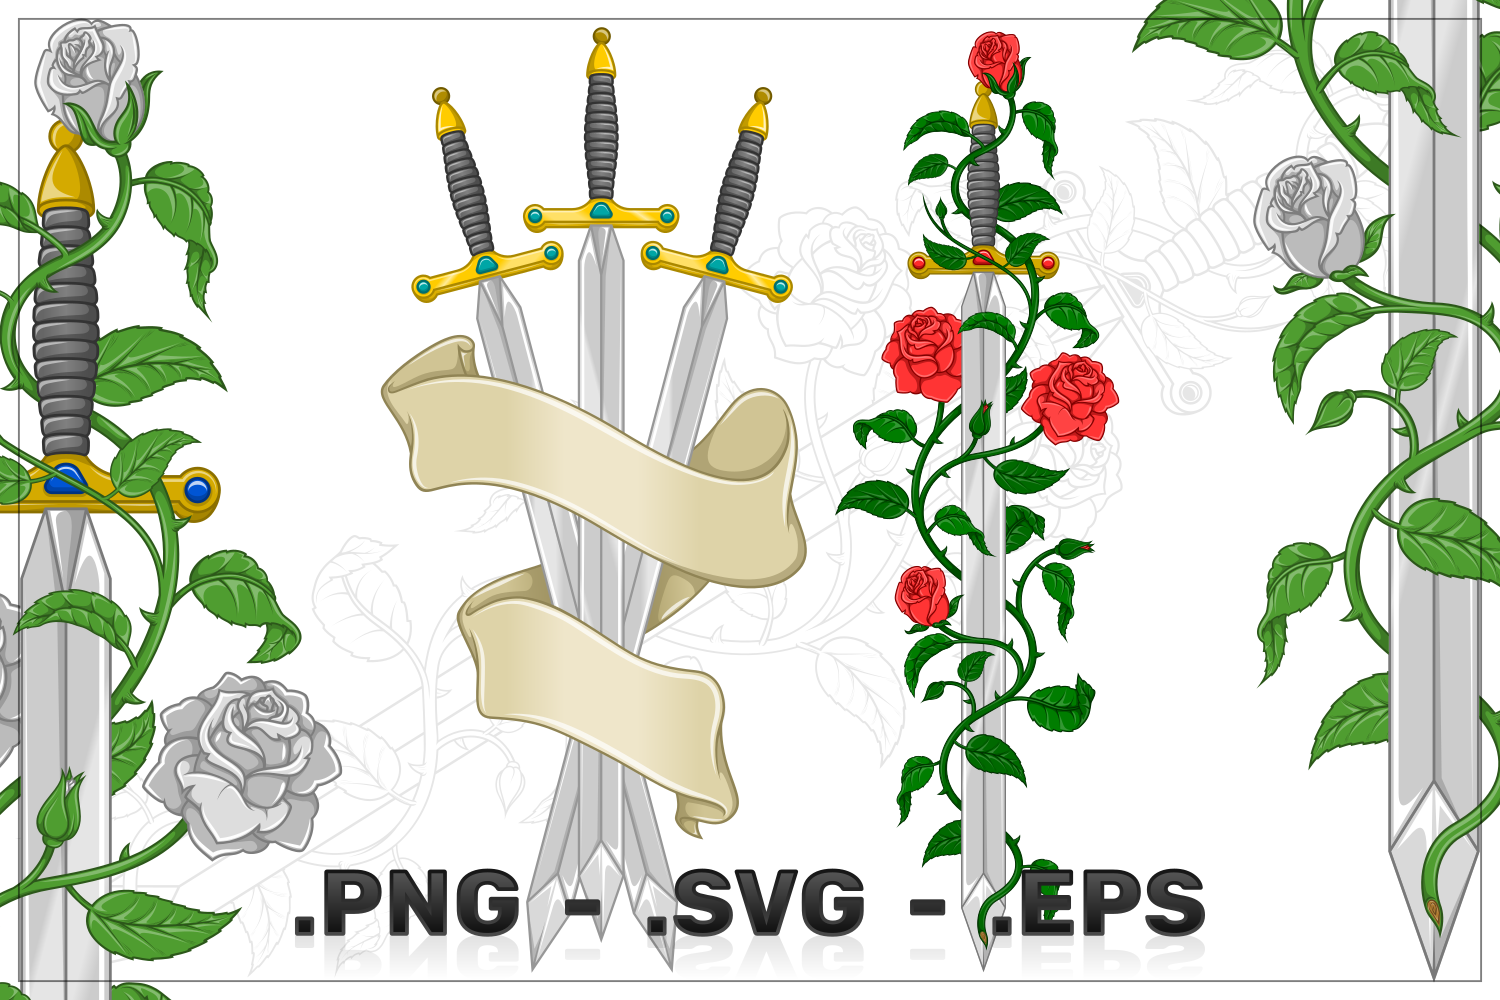 Vector Design of Sword Surrounded by Roses